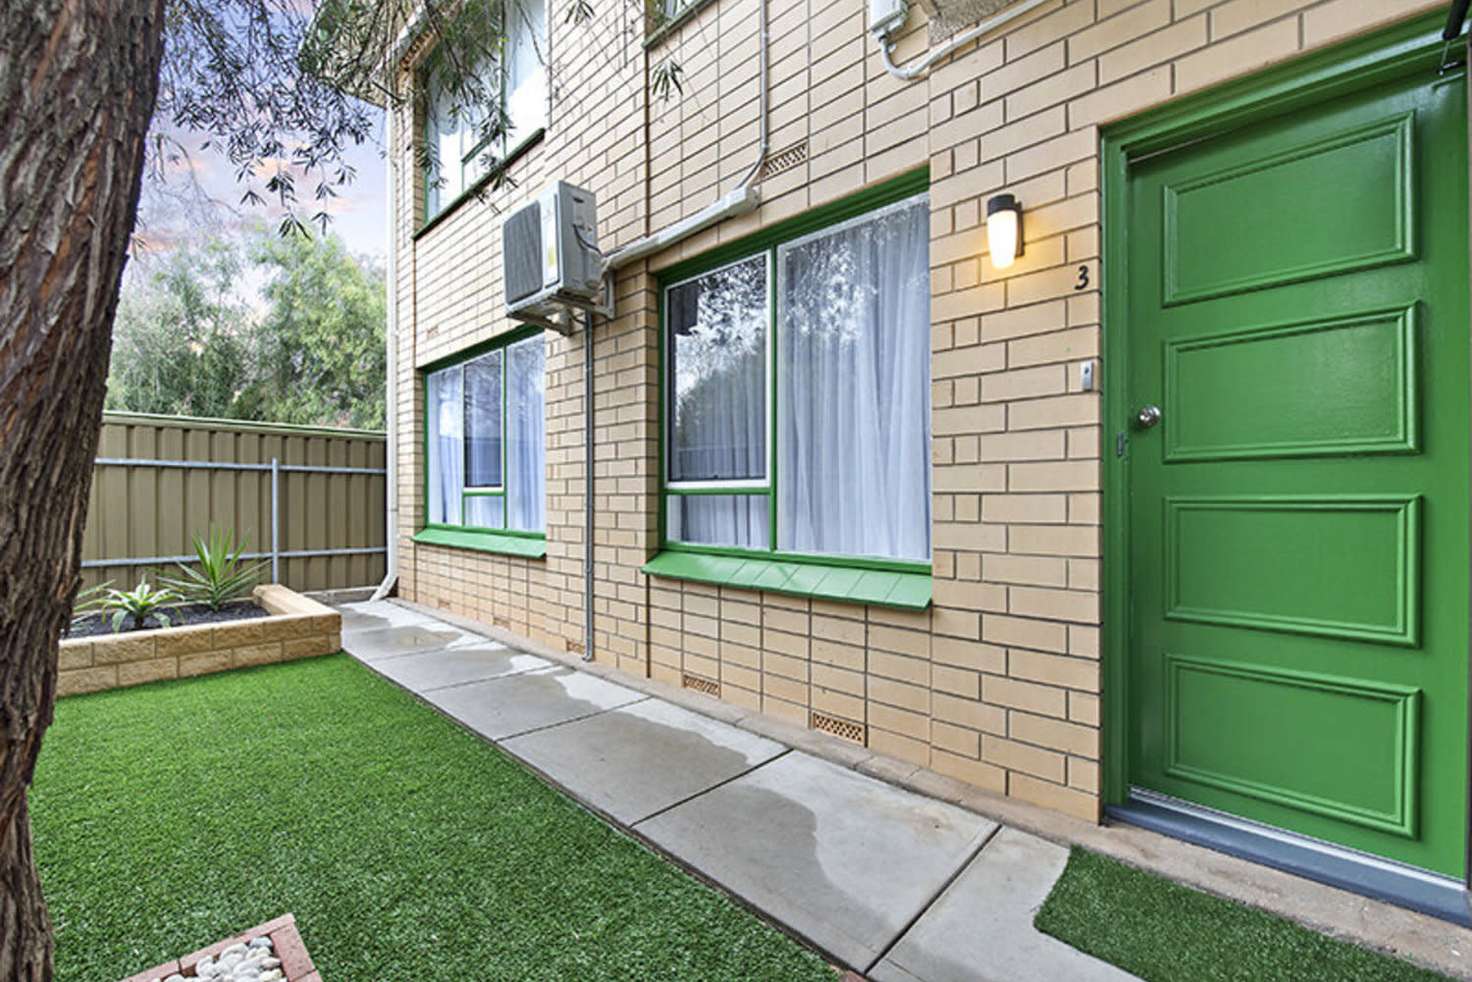 Main view of Homely house listing, 3/73 Collins Street, Broadview SA 5083